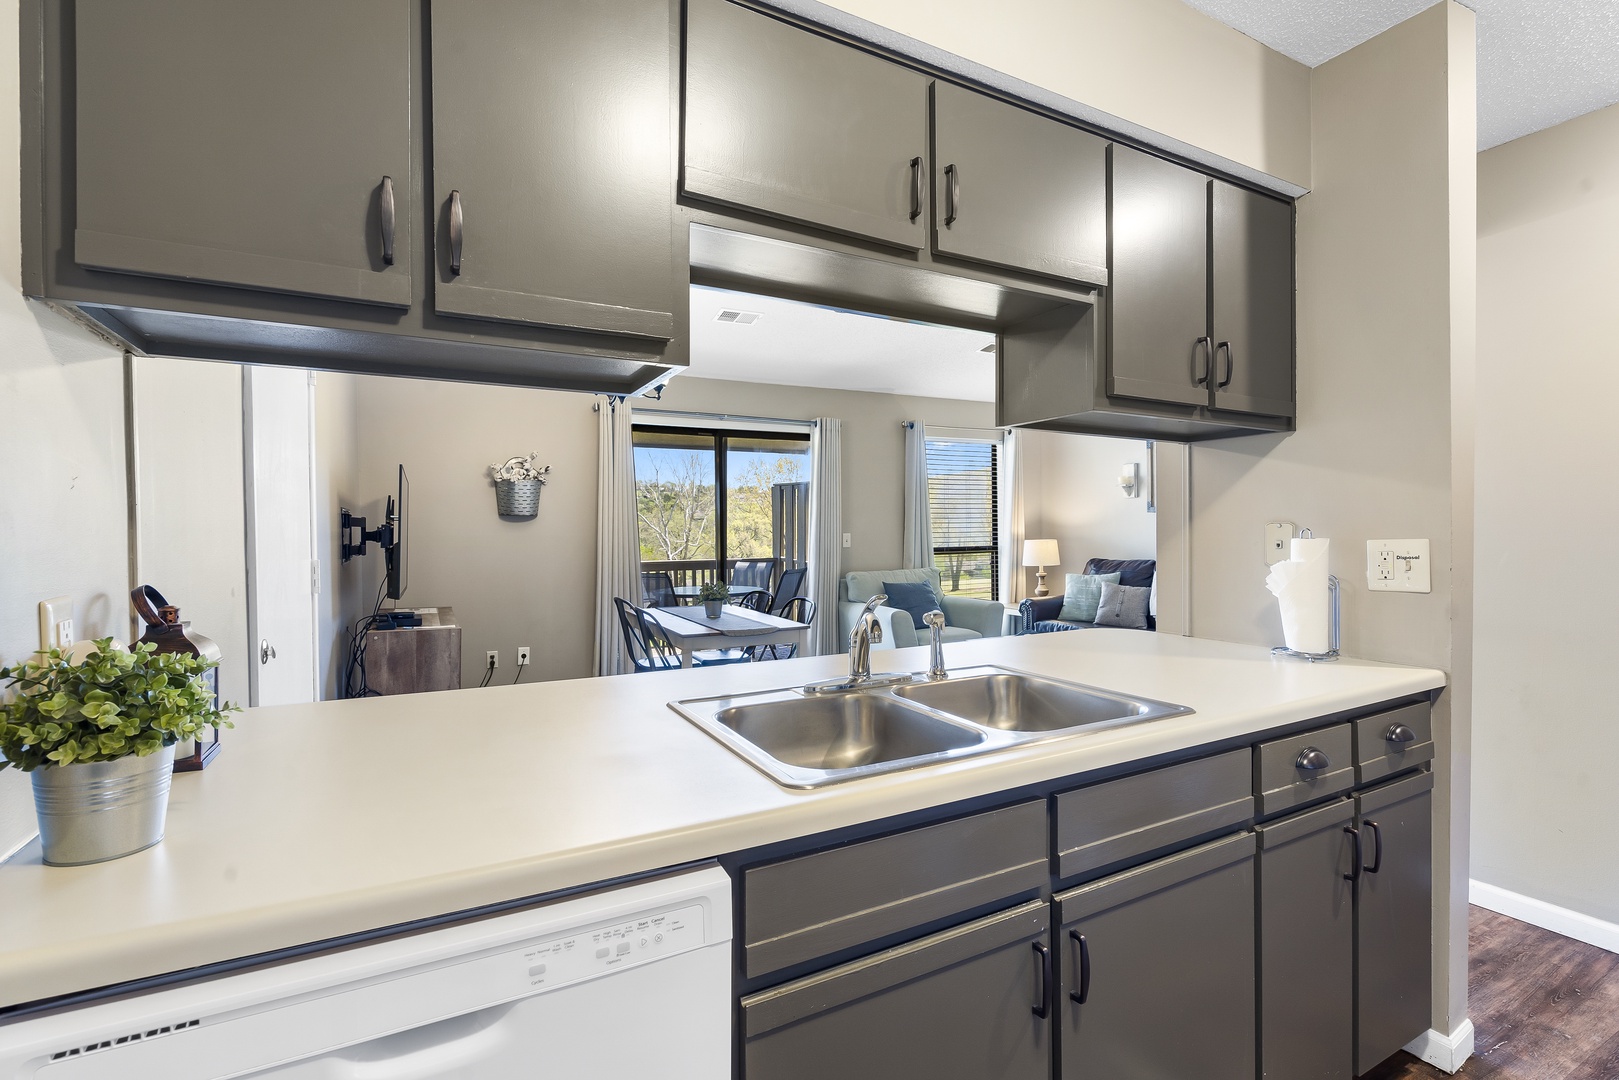 Unit 20’s breezy kitchen showcases ample space & every home comfort